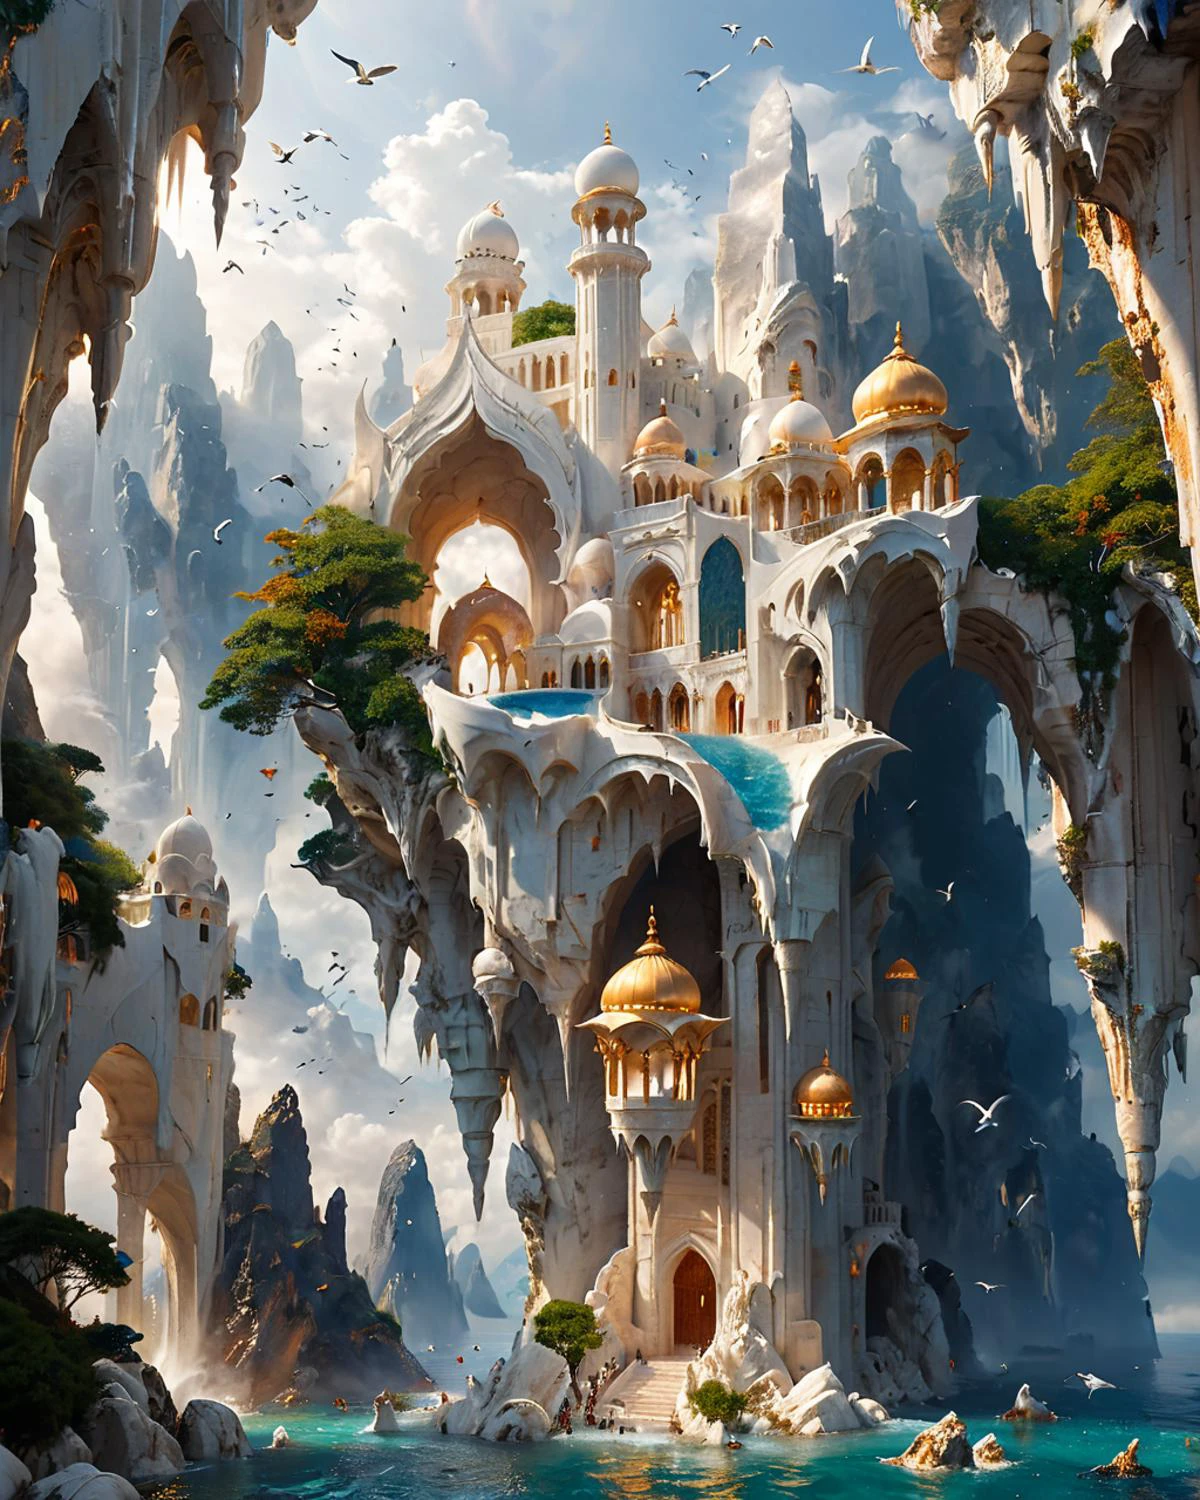 floating fantasy city, shapely white marble towers, reminiscent of the Taj Mahal, ocean, seabirds, mountains, viewed from below, fenliexl